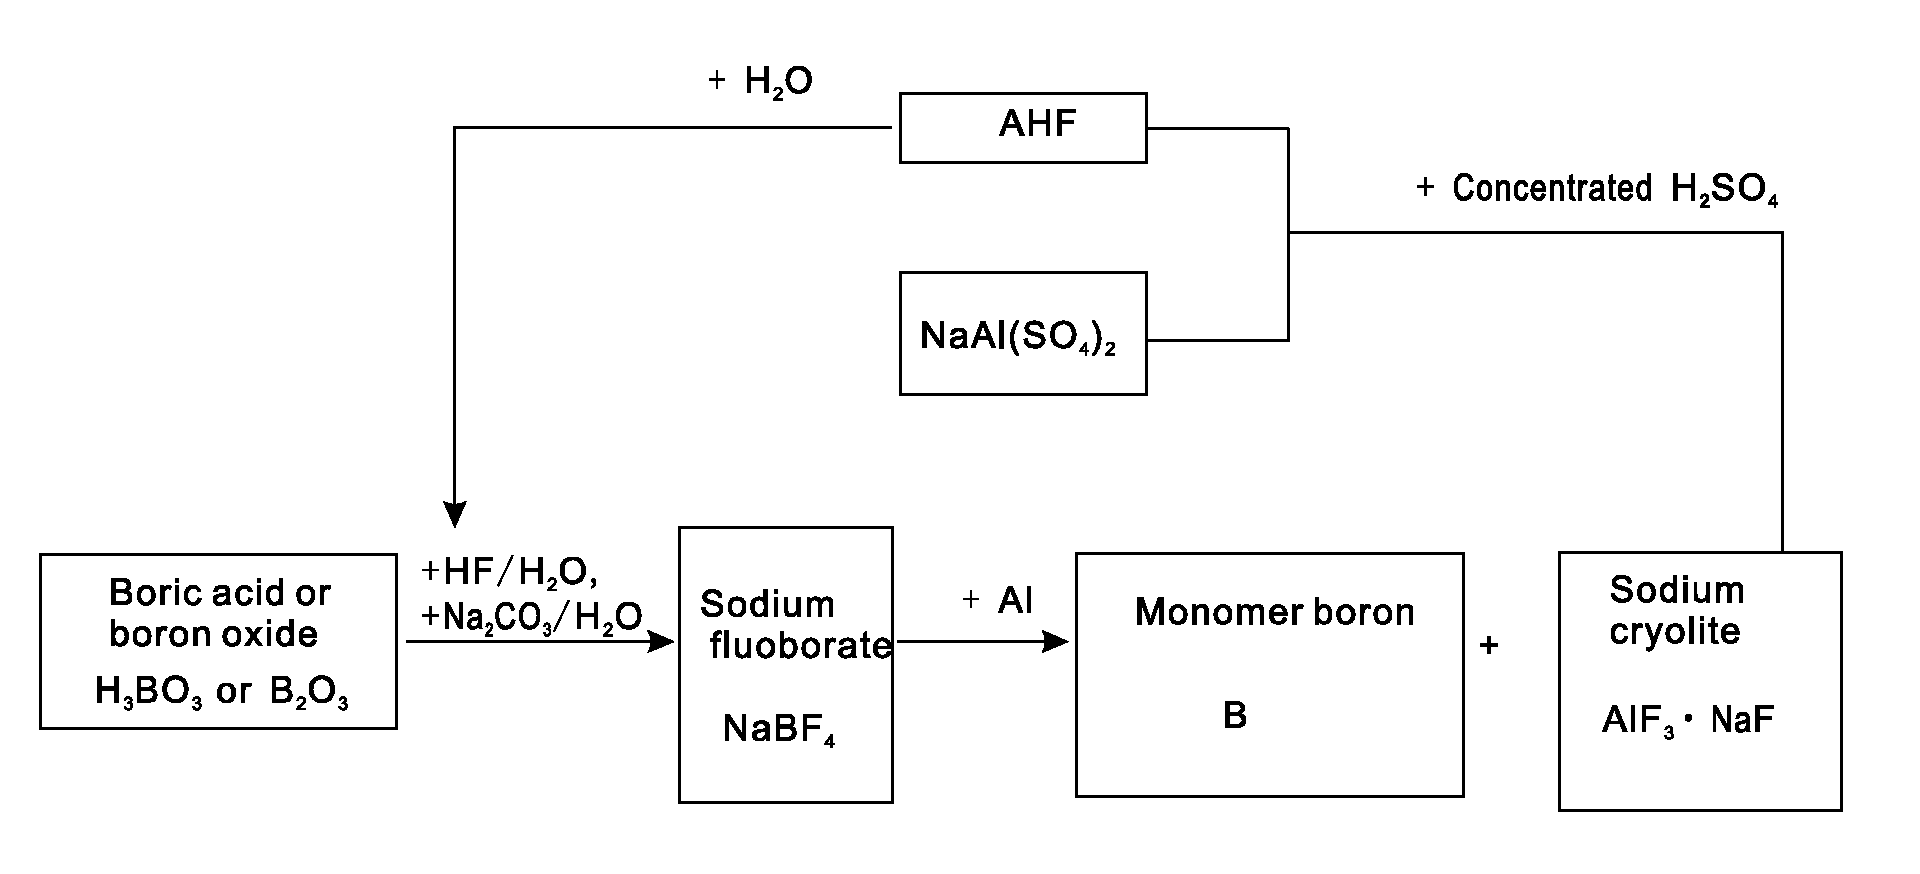 Method for cyclically preparing elemental boron and coproducing sodium cryolite using sodium fluoborate as intermediate material